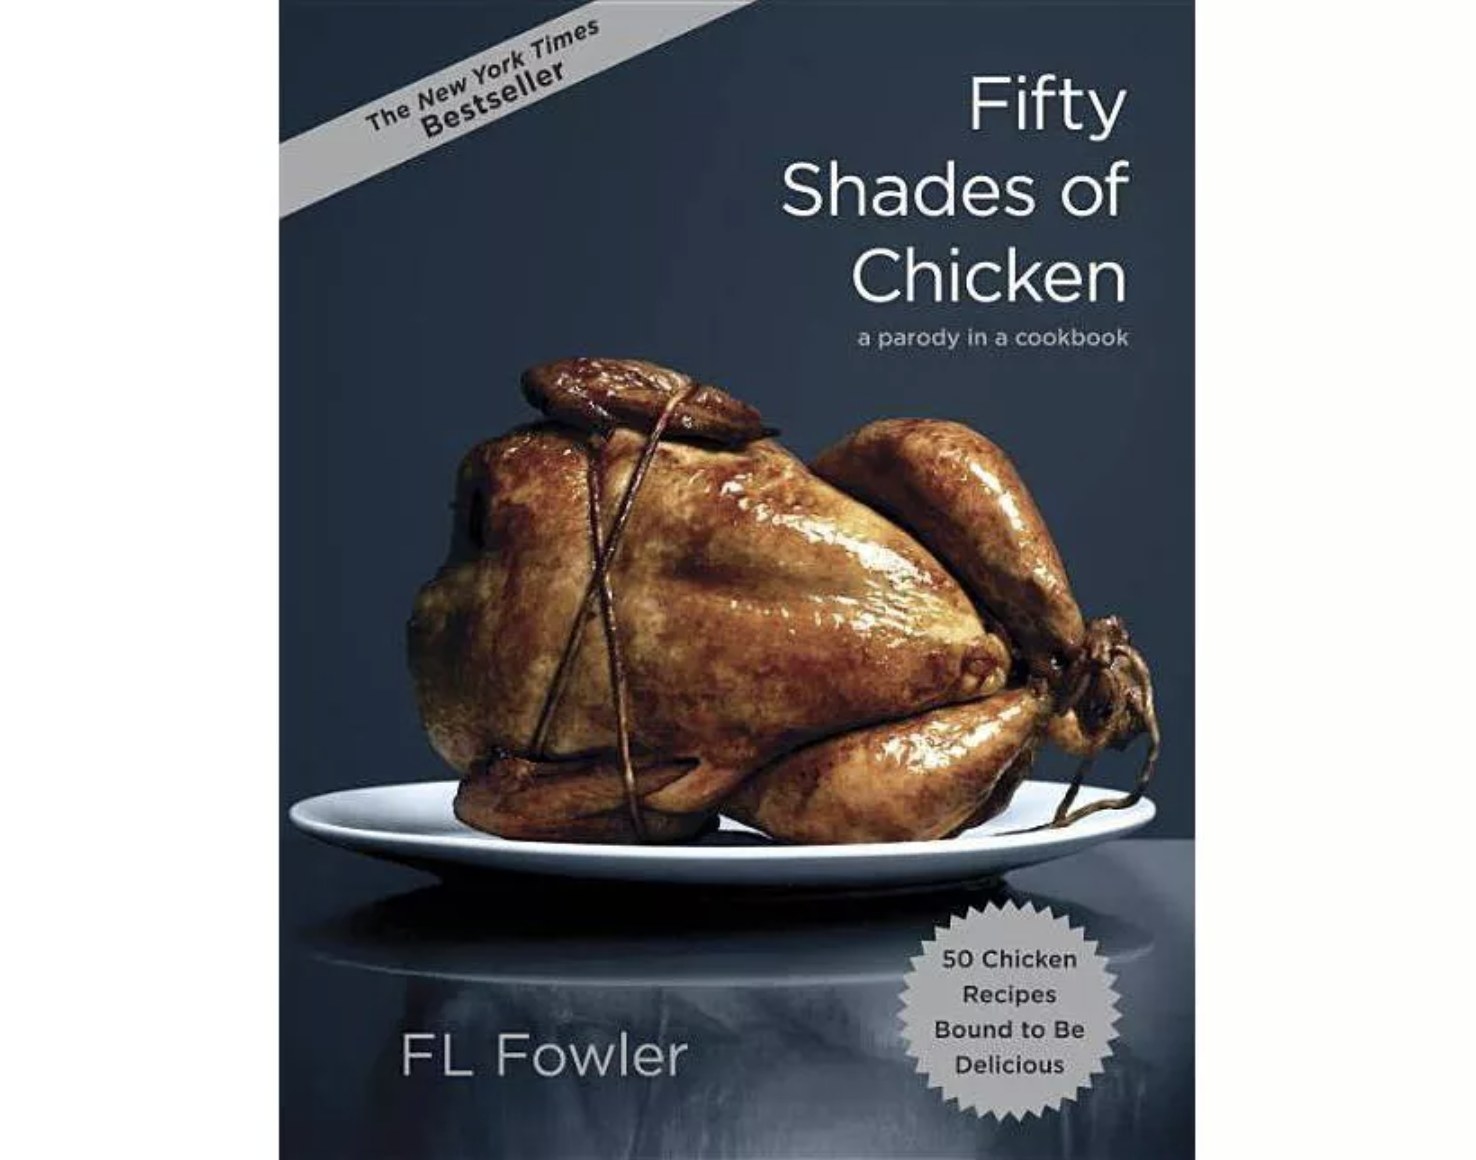 The Fifty Shades of Chicken cookbook